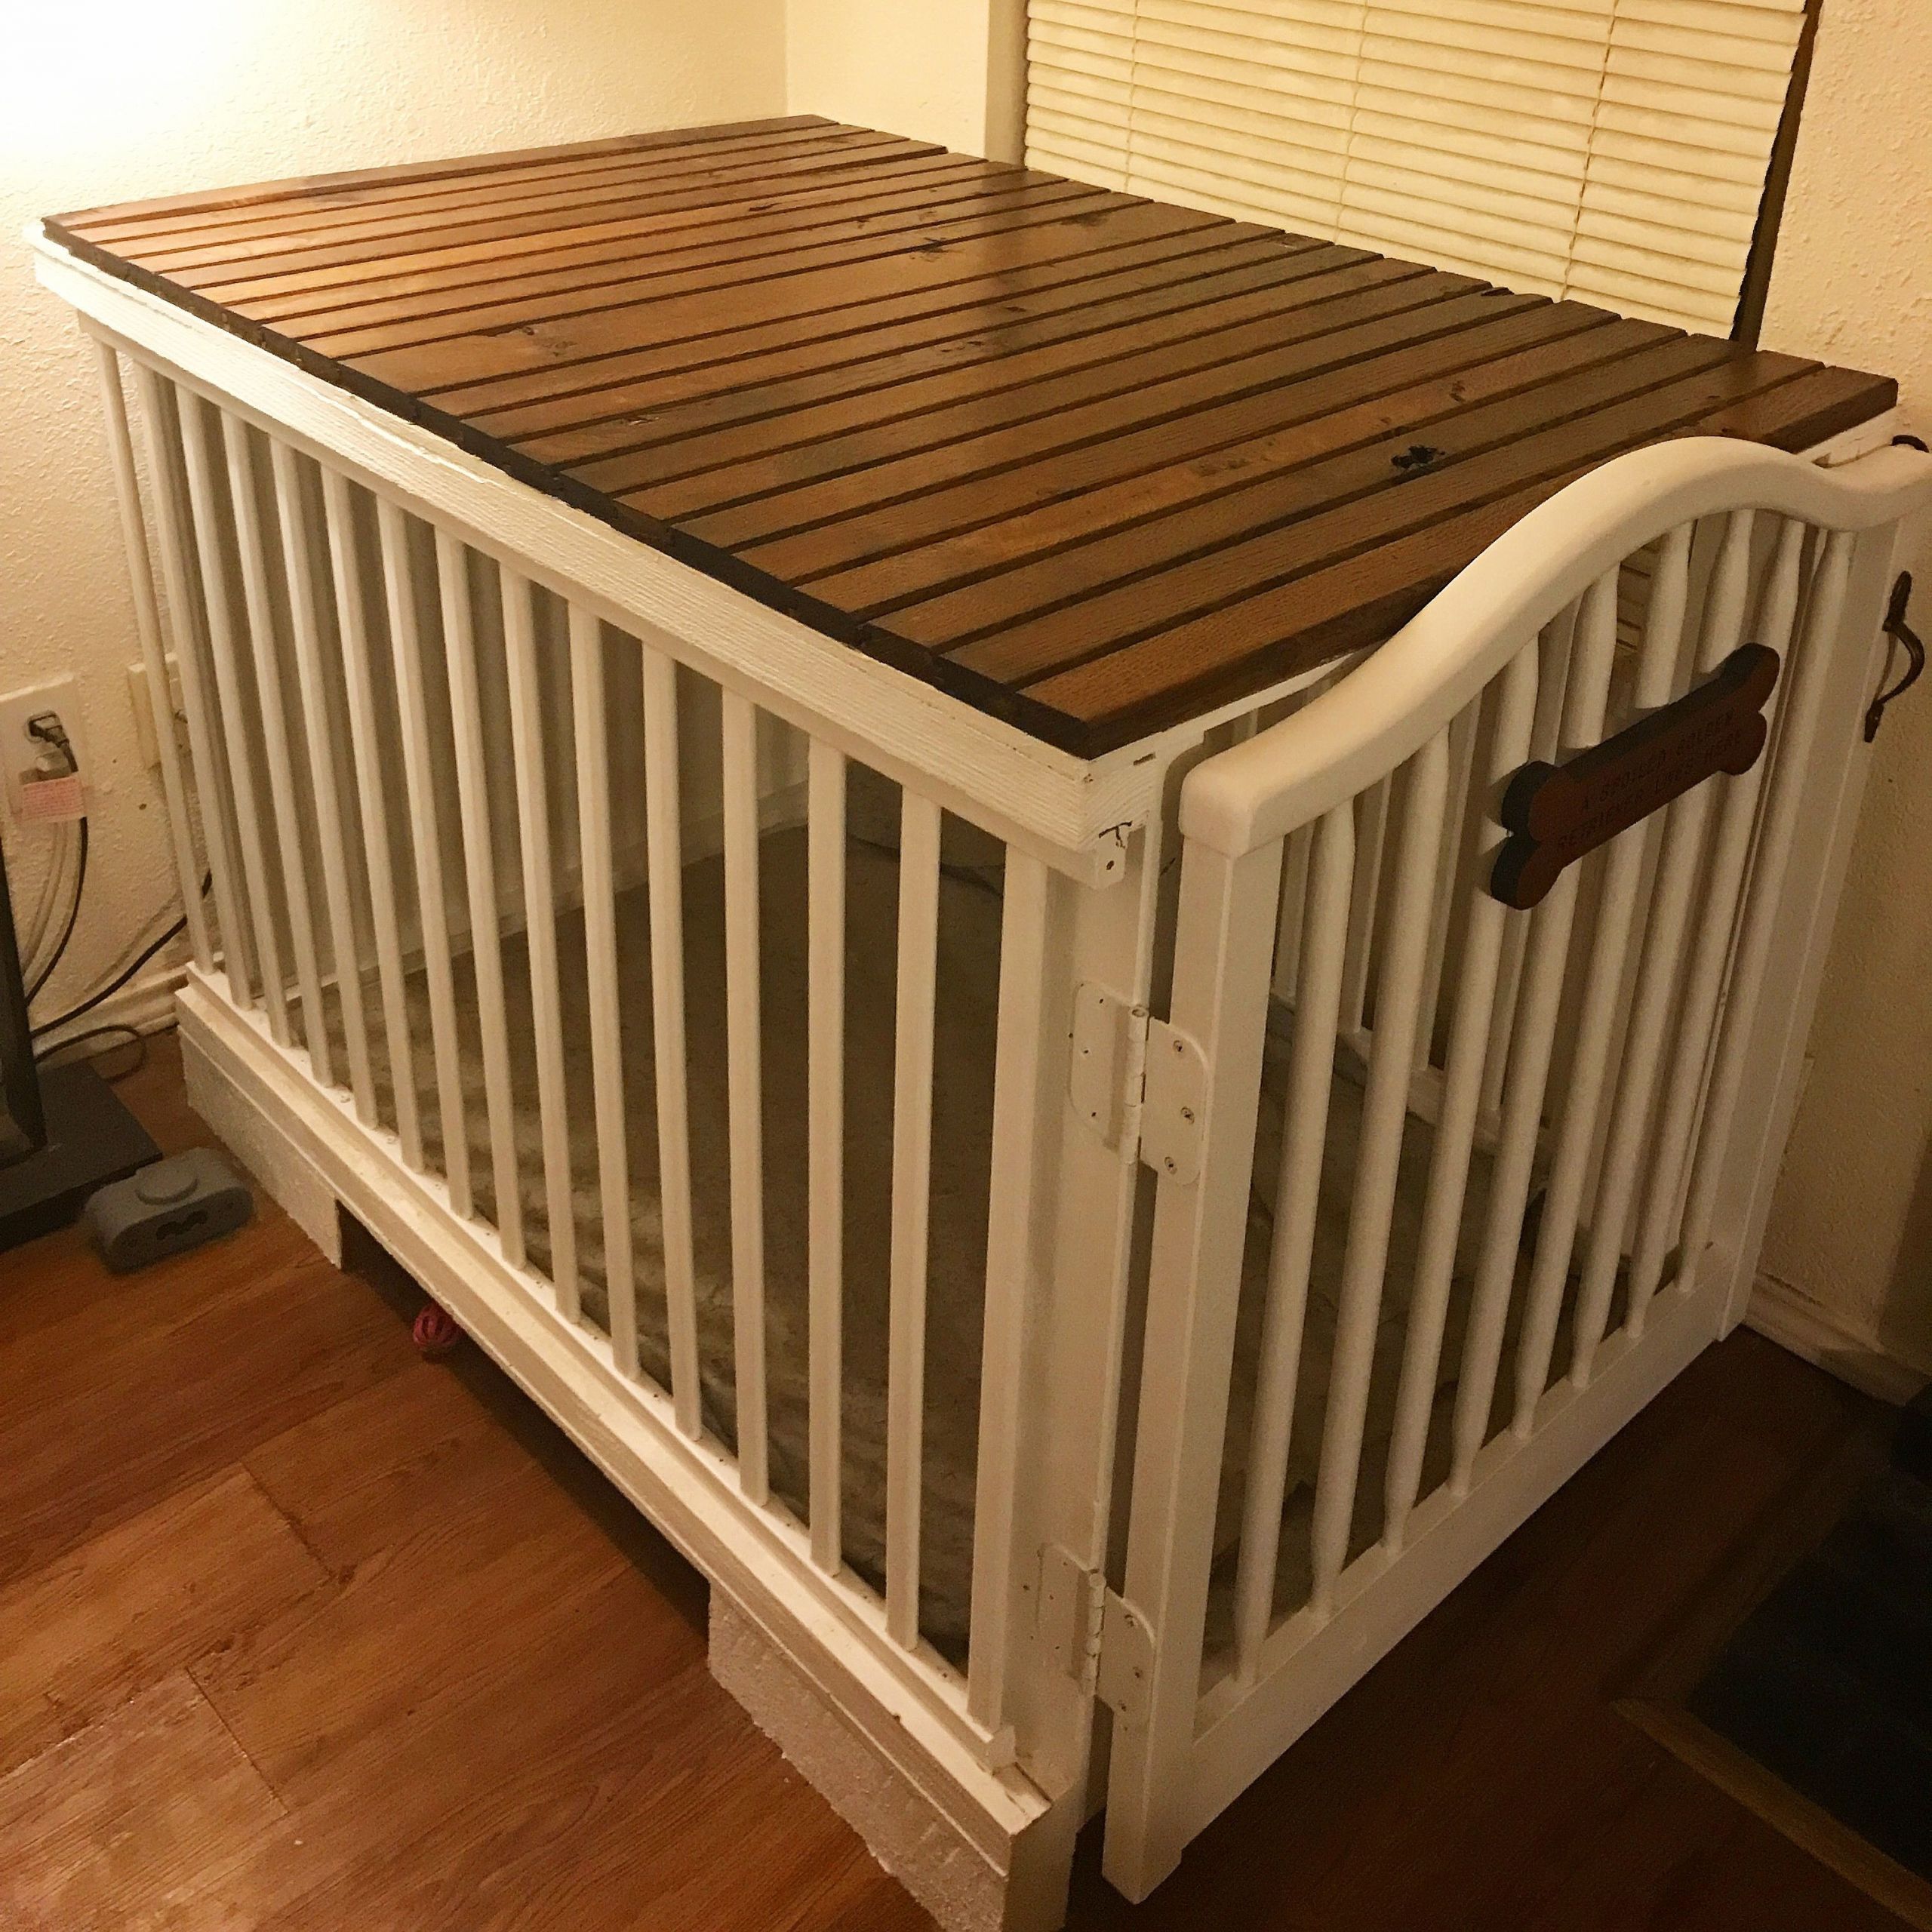 Wooden Dog Crate DIY
 DIY Dog Crate Repurposed baby crib and pallet Reclaimed